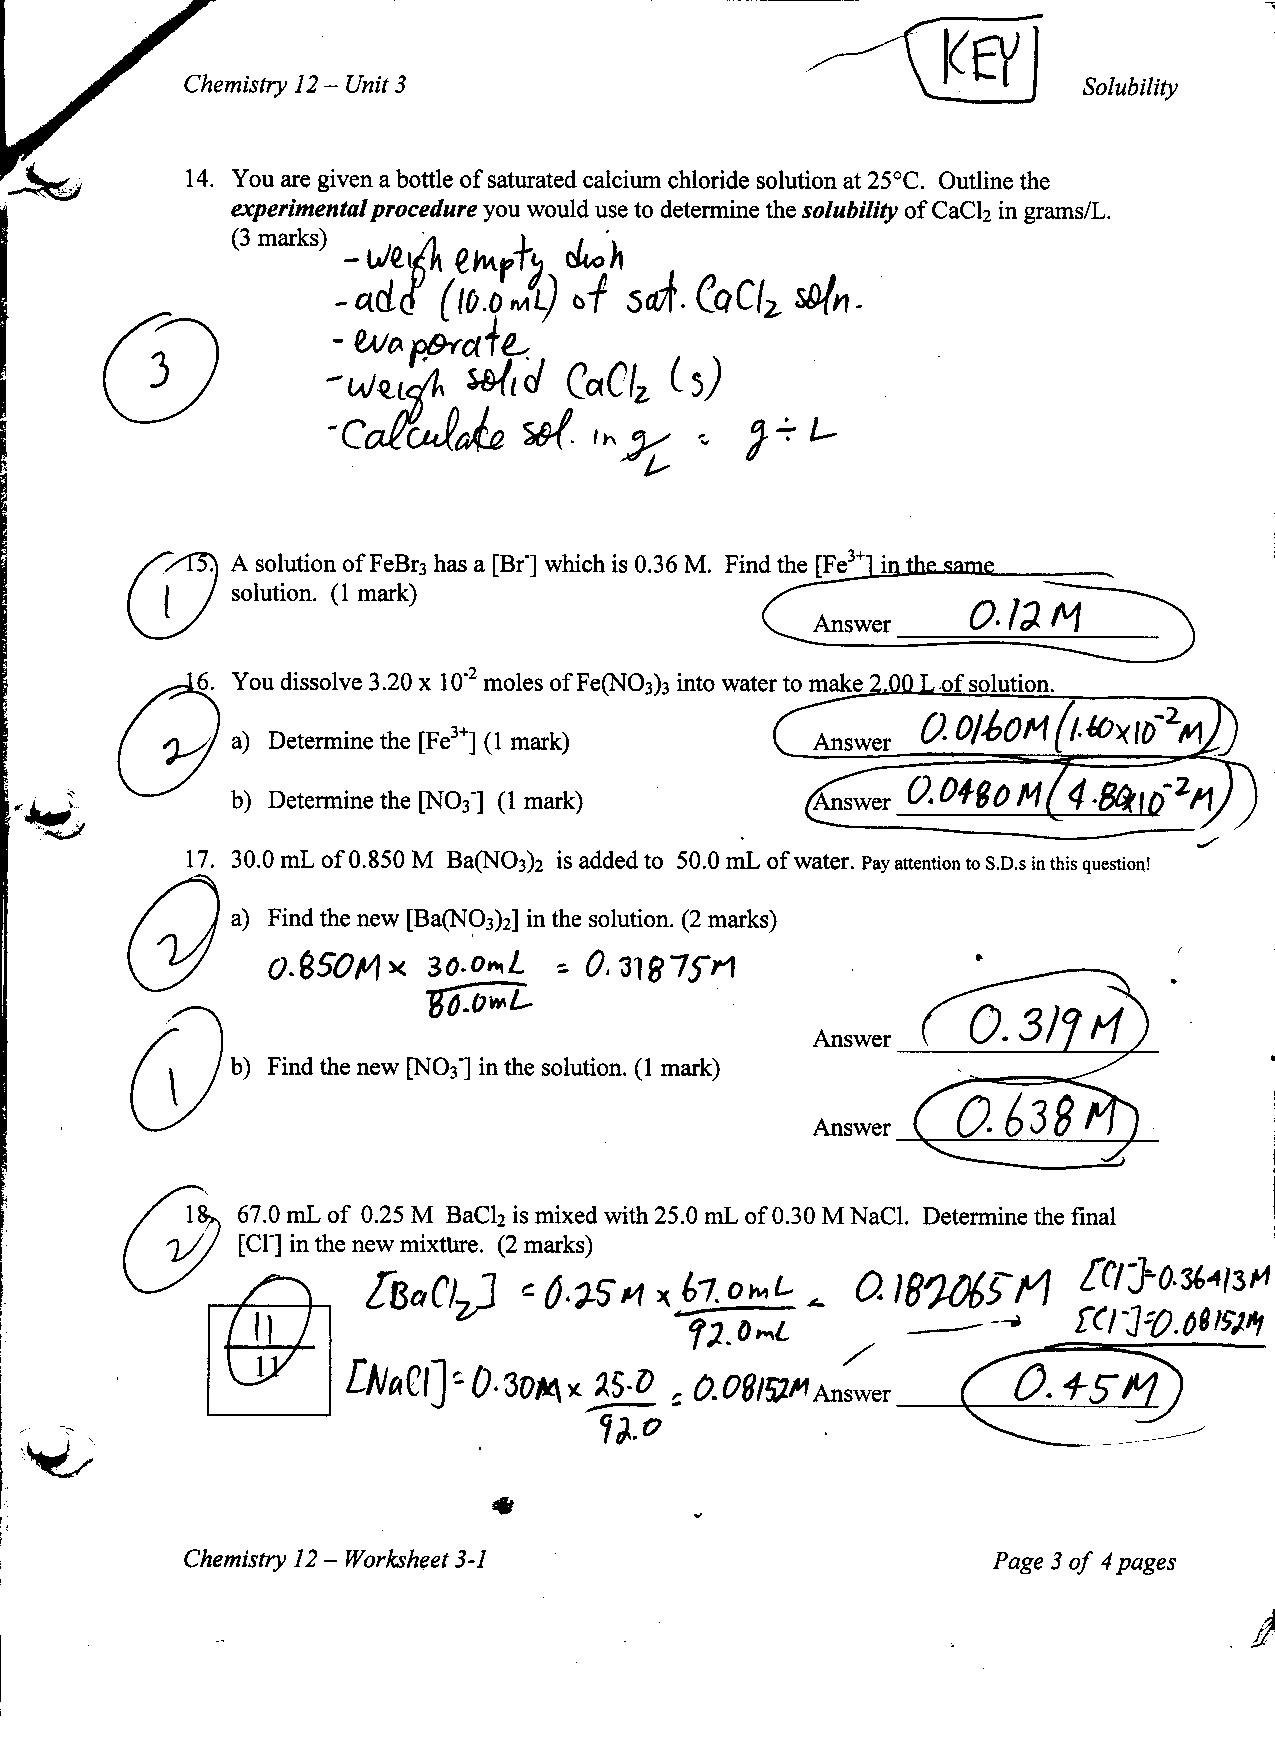 Density Calculations Worksheet Answers Unit 1 Worksheet 4 Applied Density Problems